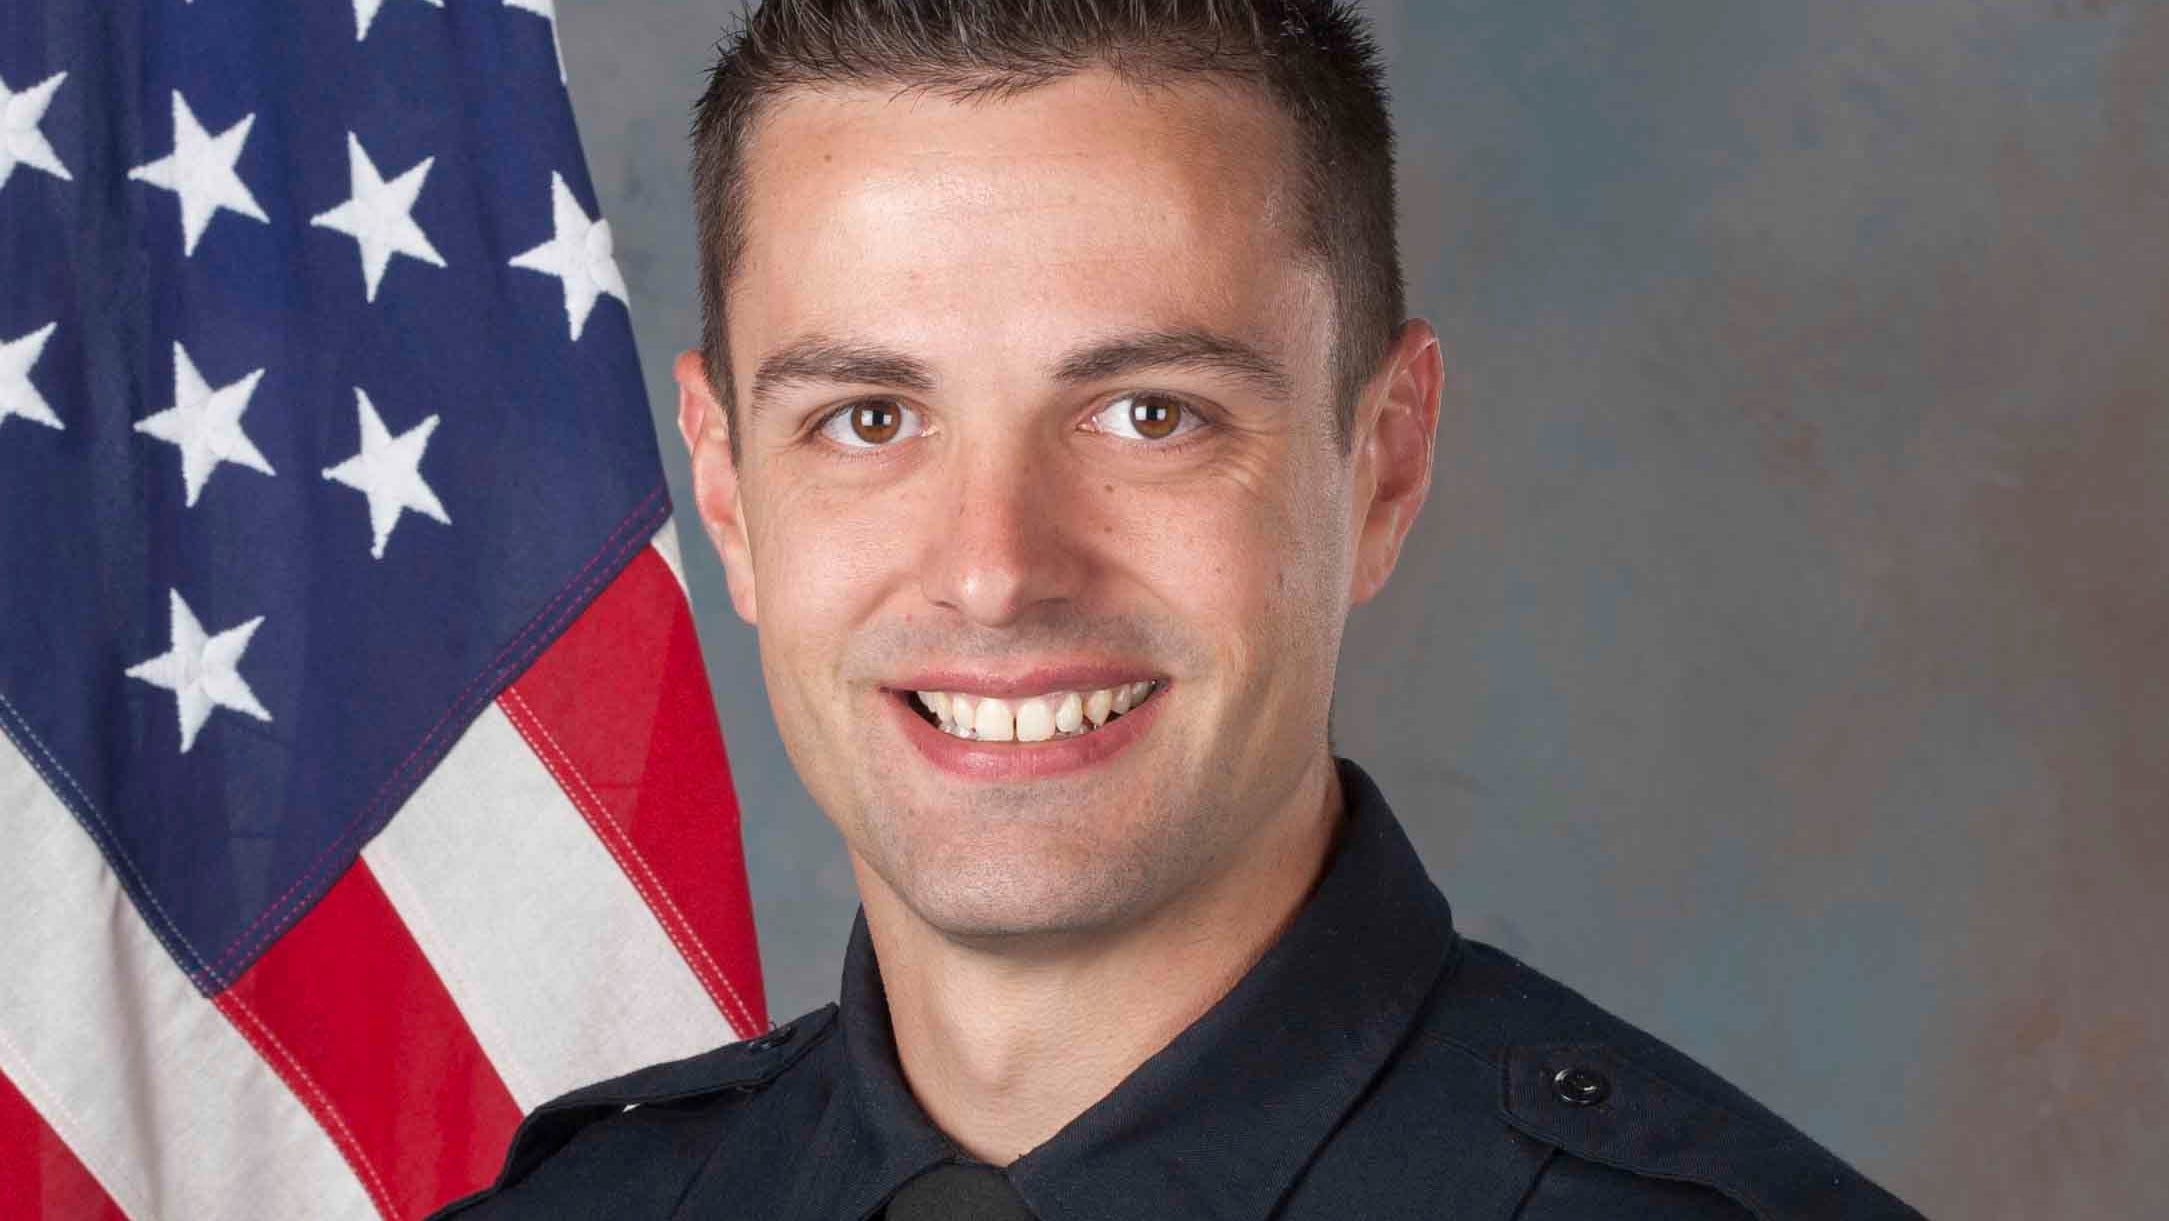 Arizona Police Officer Ryan Remington Fired After Fatal Shooting Probe